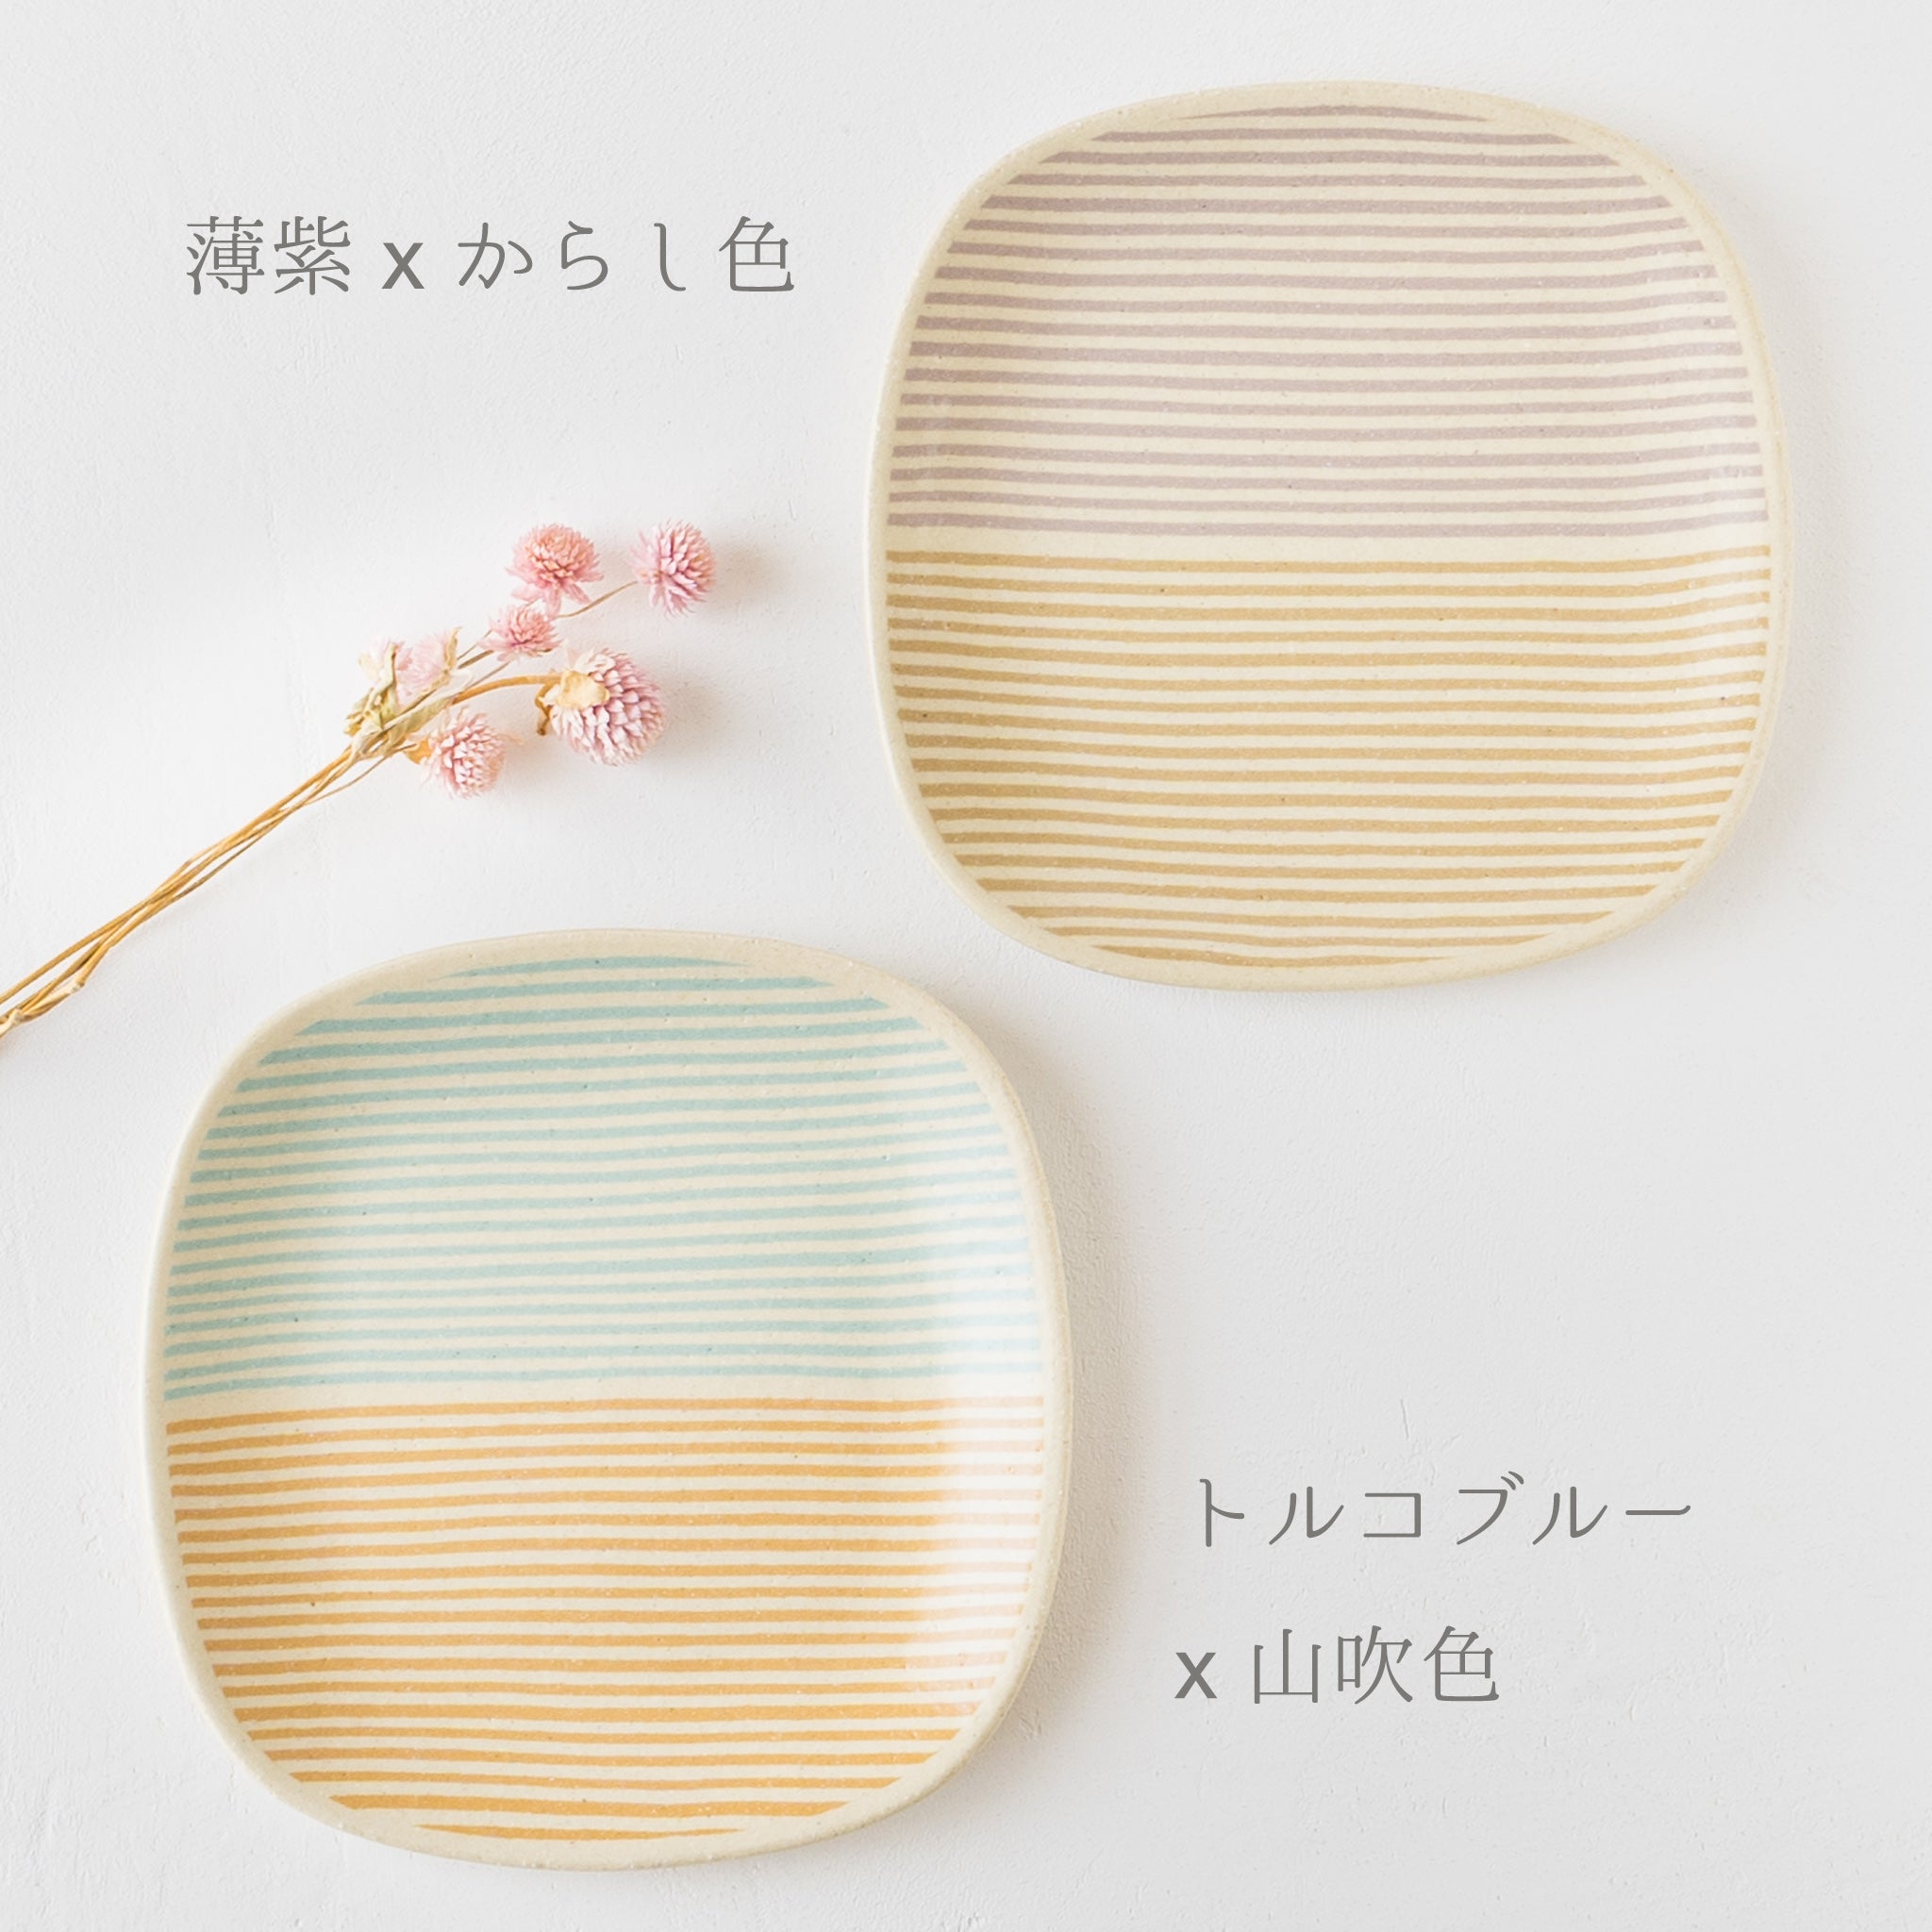 Hanako Sakashita's bread plate with two tone colors is fashionable and cute.